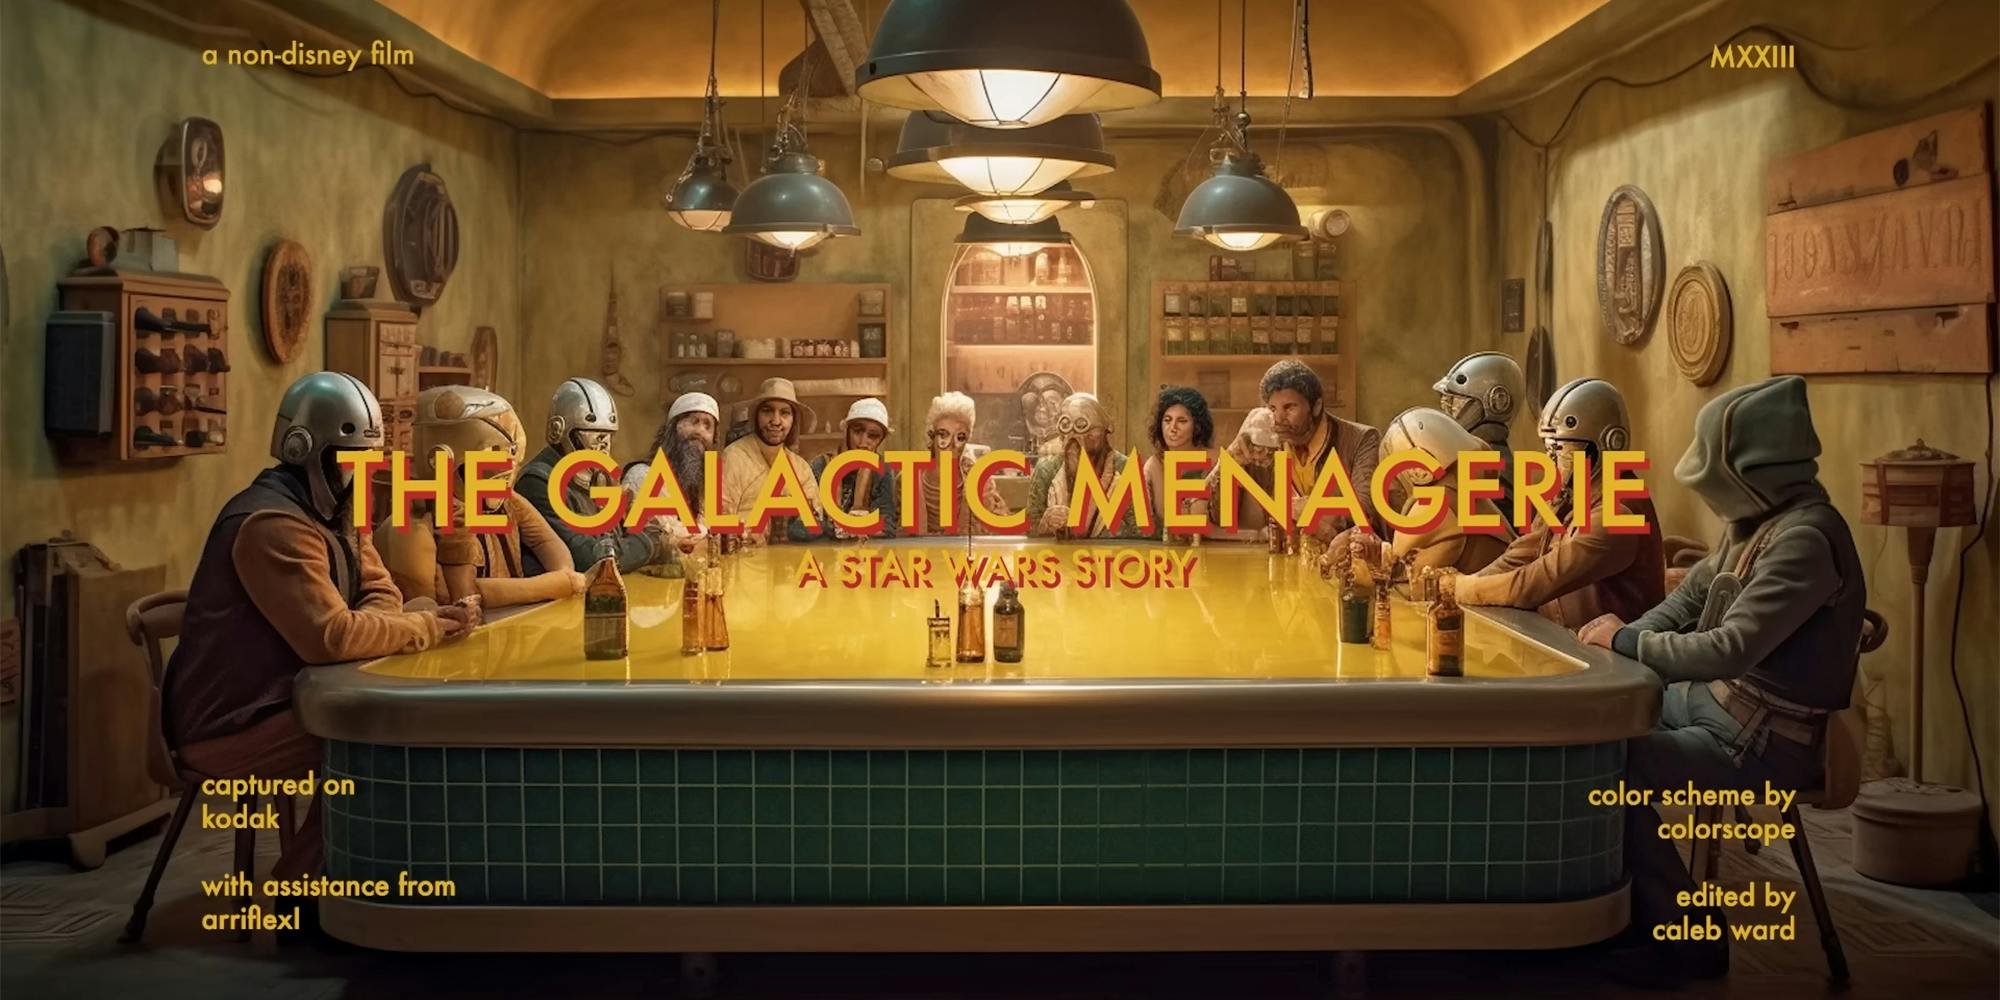 Why Wes Anderson fans hate this AI-generated 'Star Wars' video